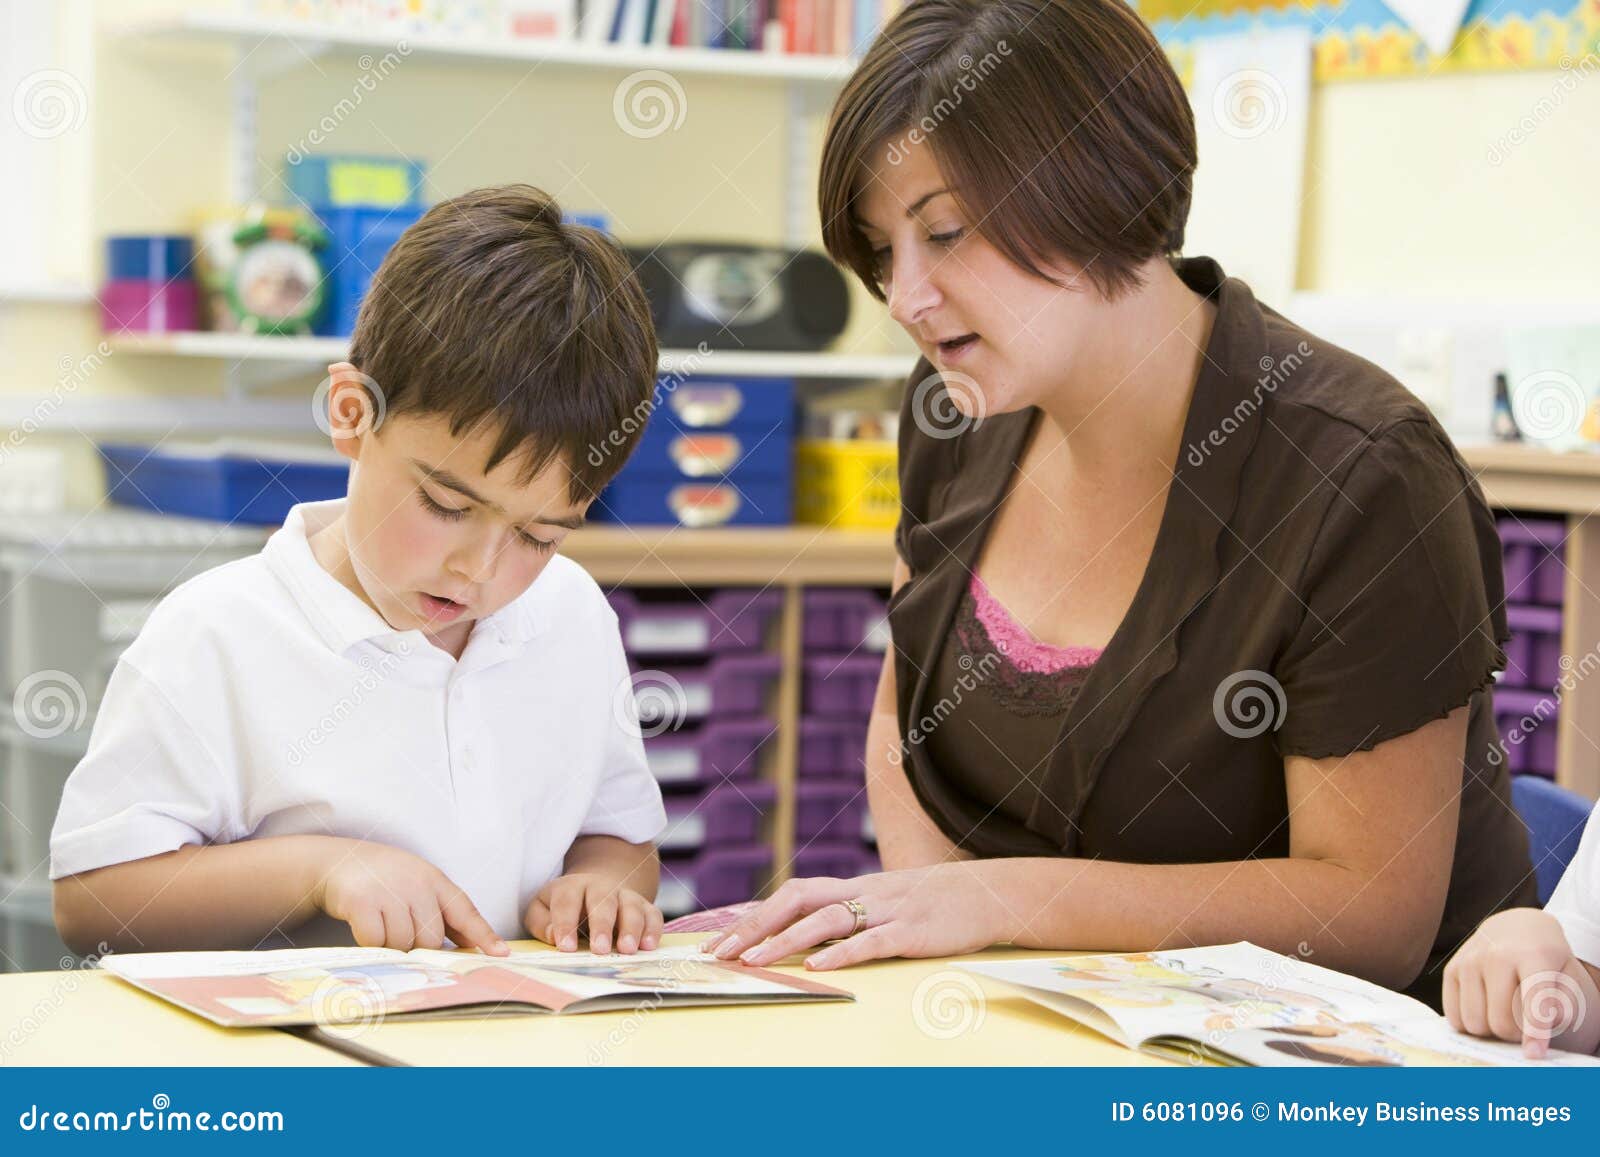 a schoolboy and his teacher reading in class